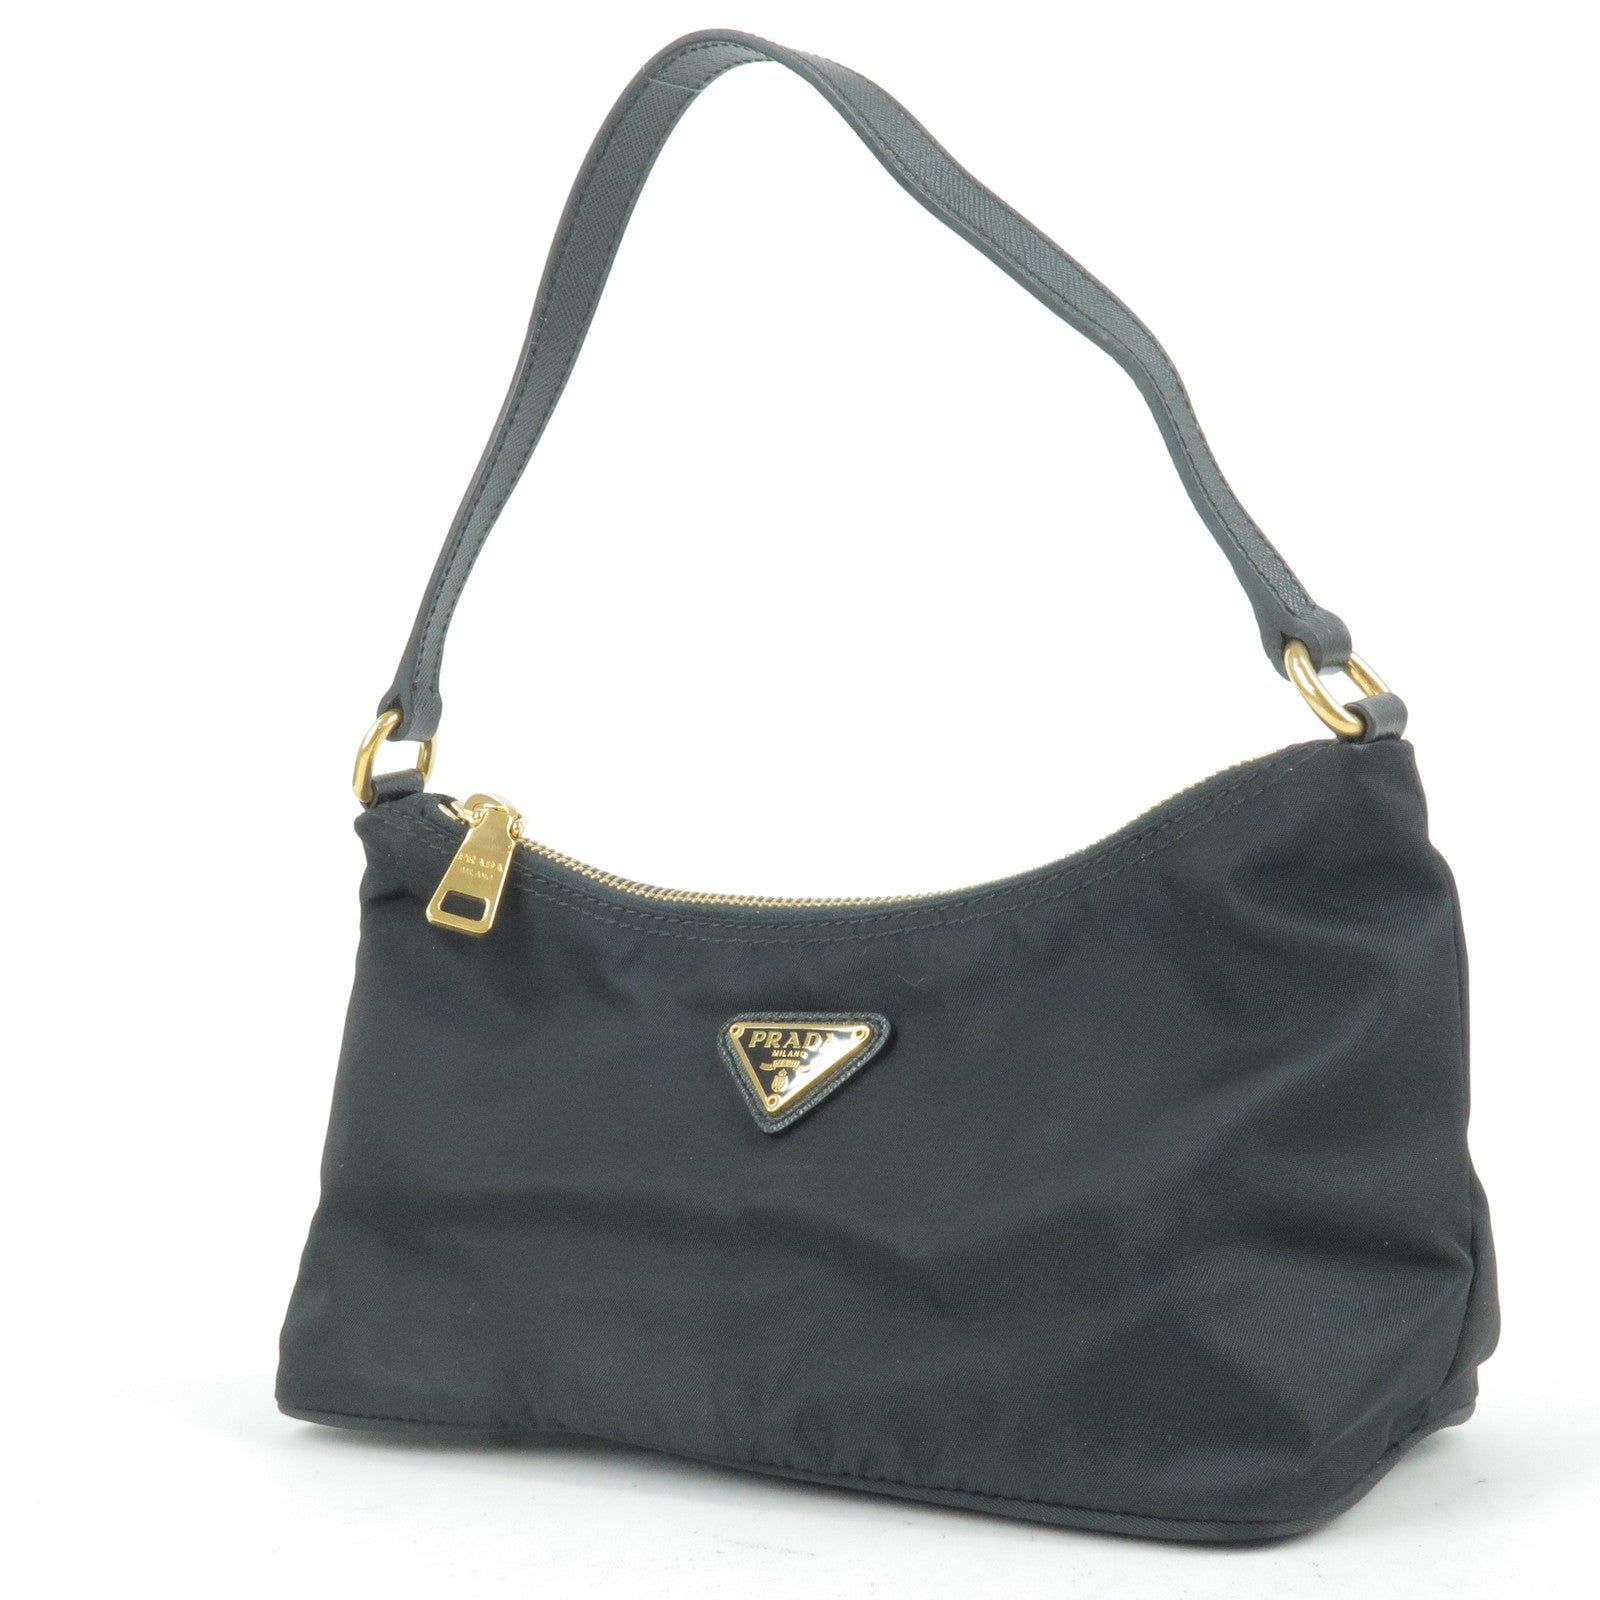 Prada Re-Edition 2005 Re-Nylon Bag: Price increase!? Review, Try